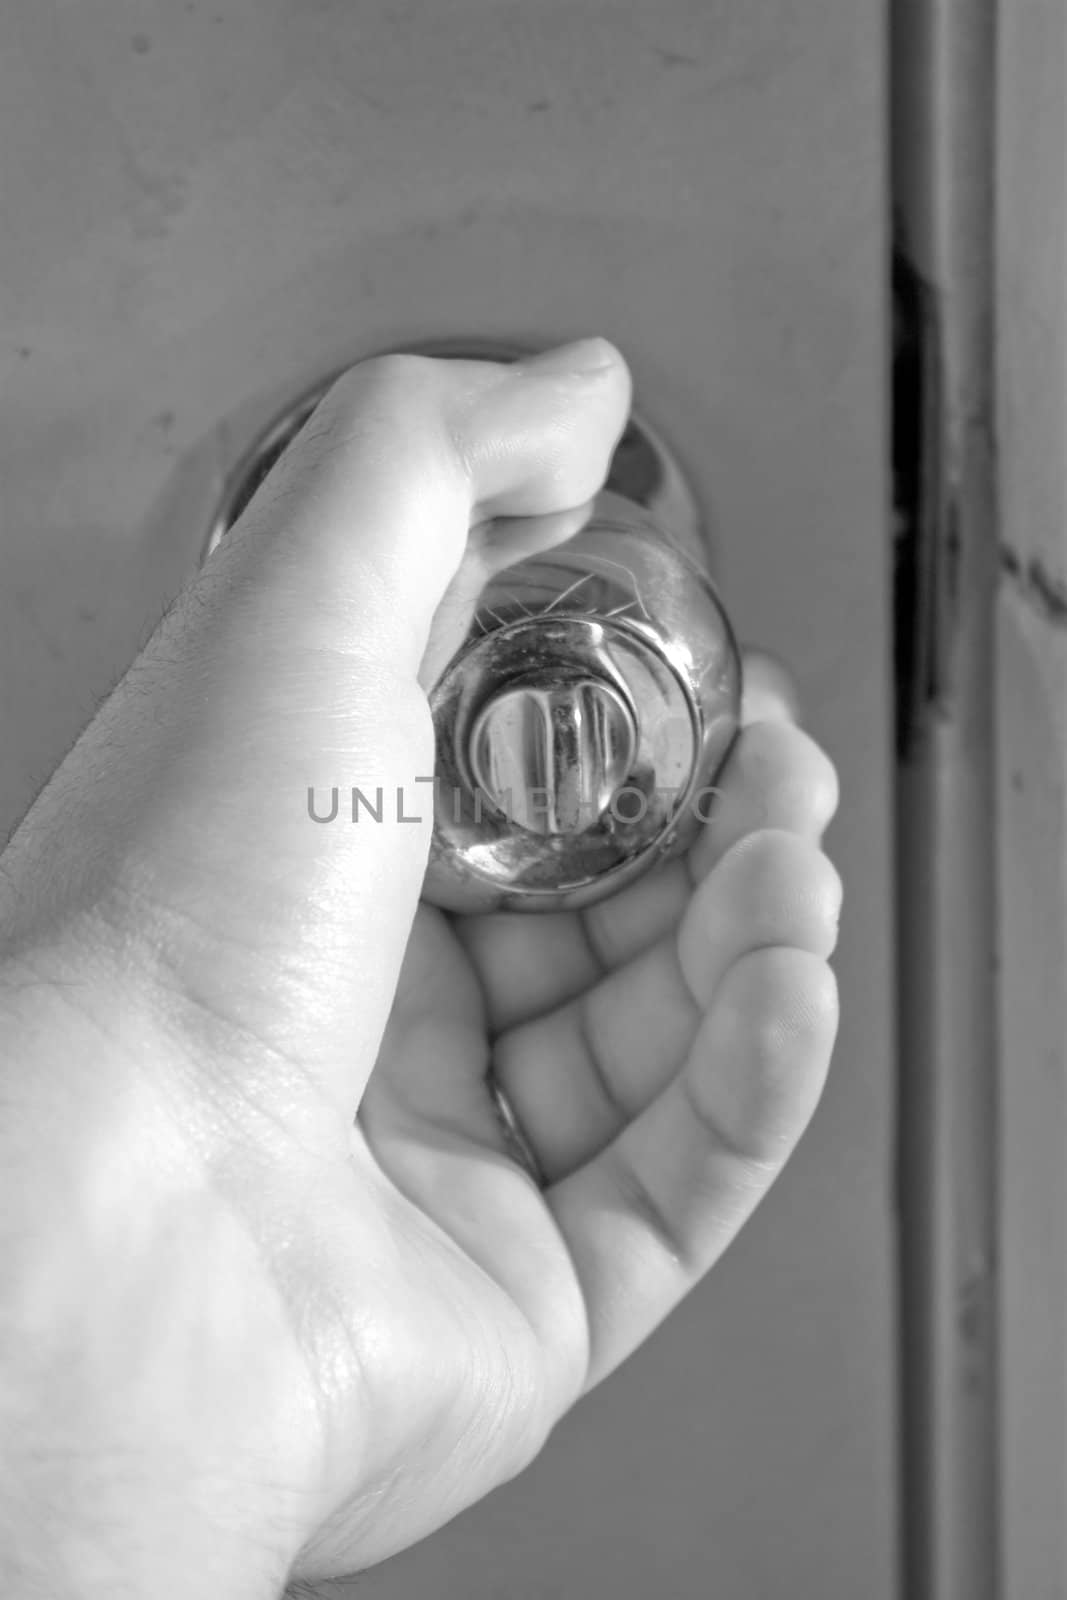 A hand grasping a shiny doorknob in black and white.